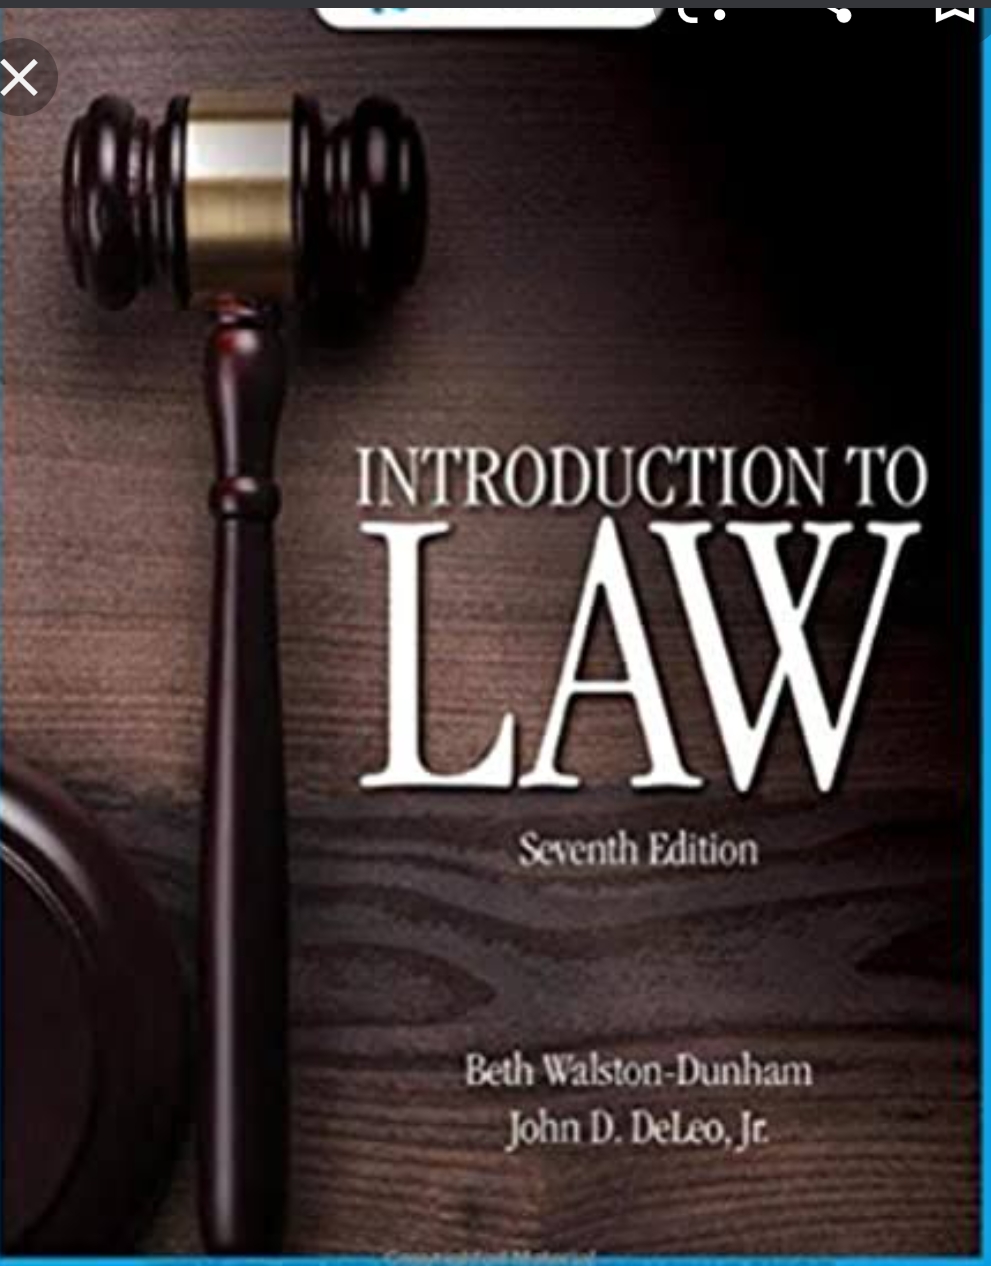 Introduction to law- Ist semester